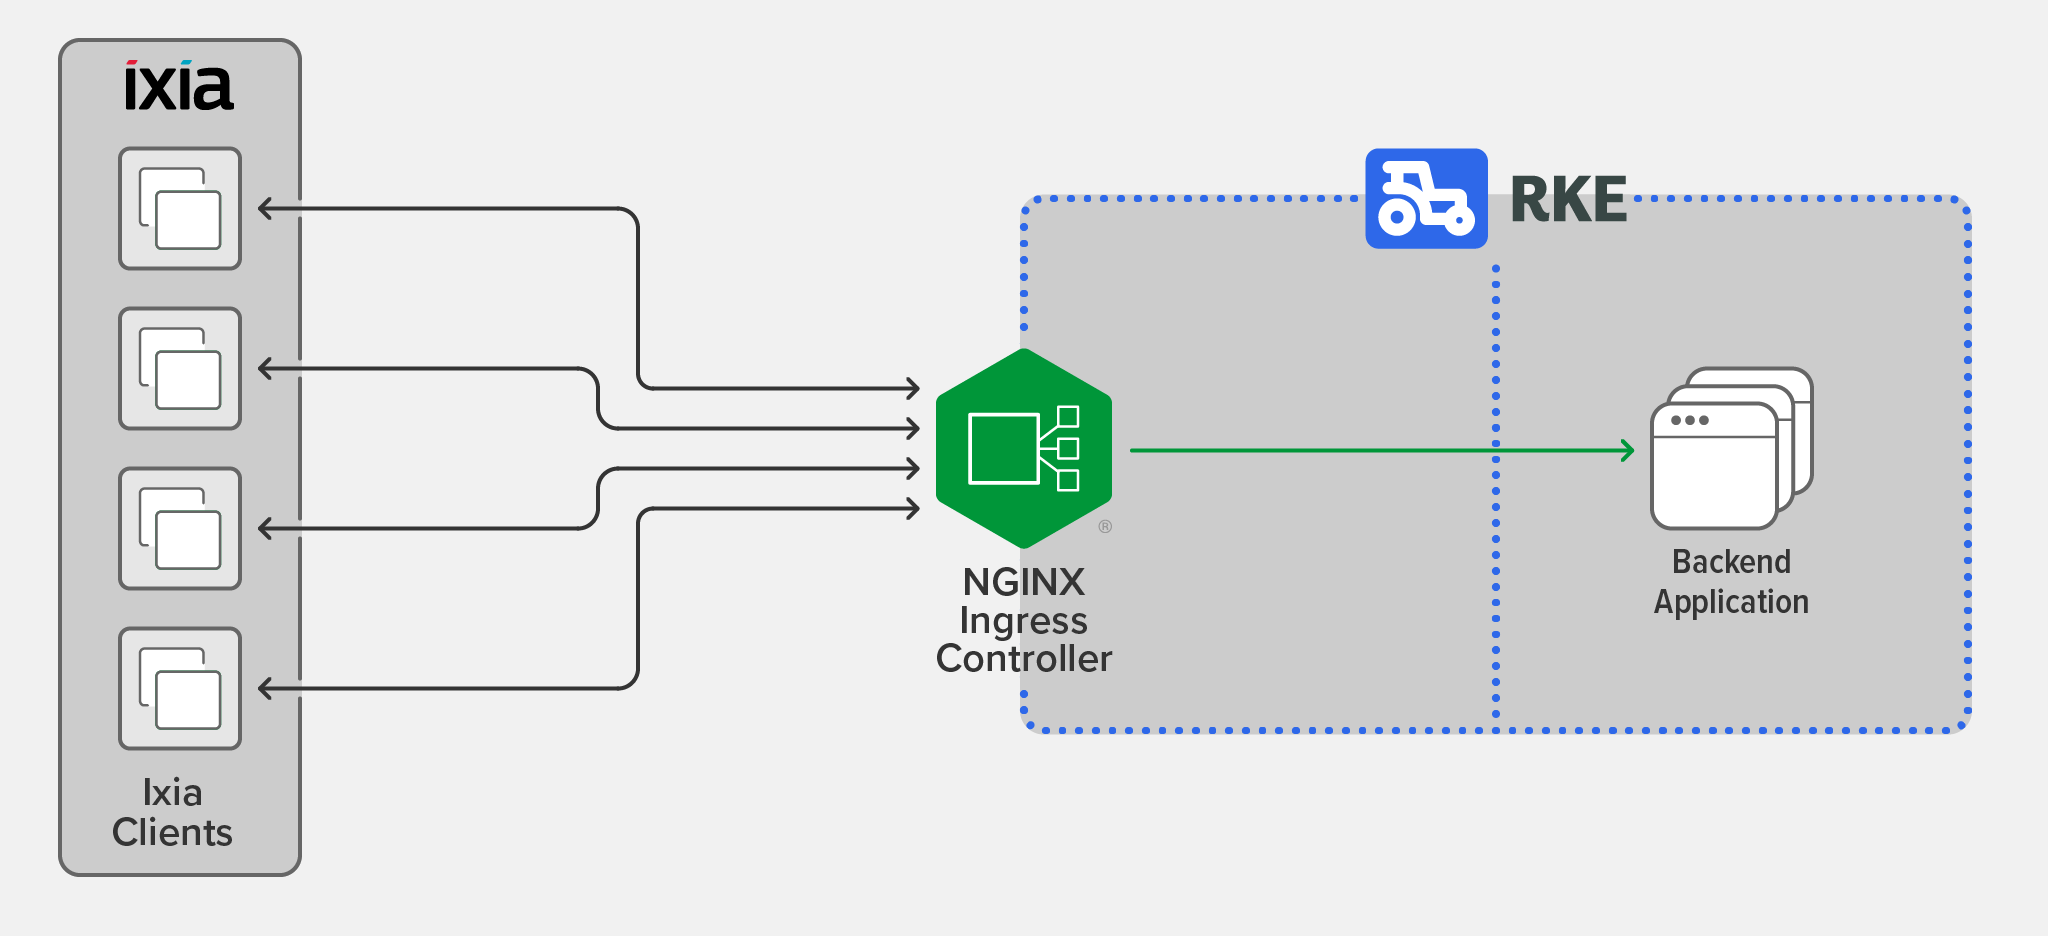 Topology for testing NGINX performance in a Kubernetes environment